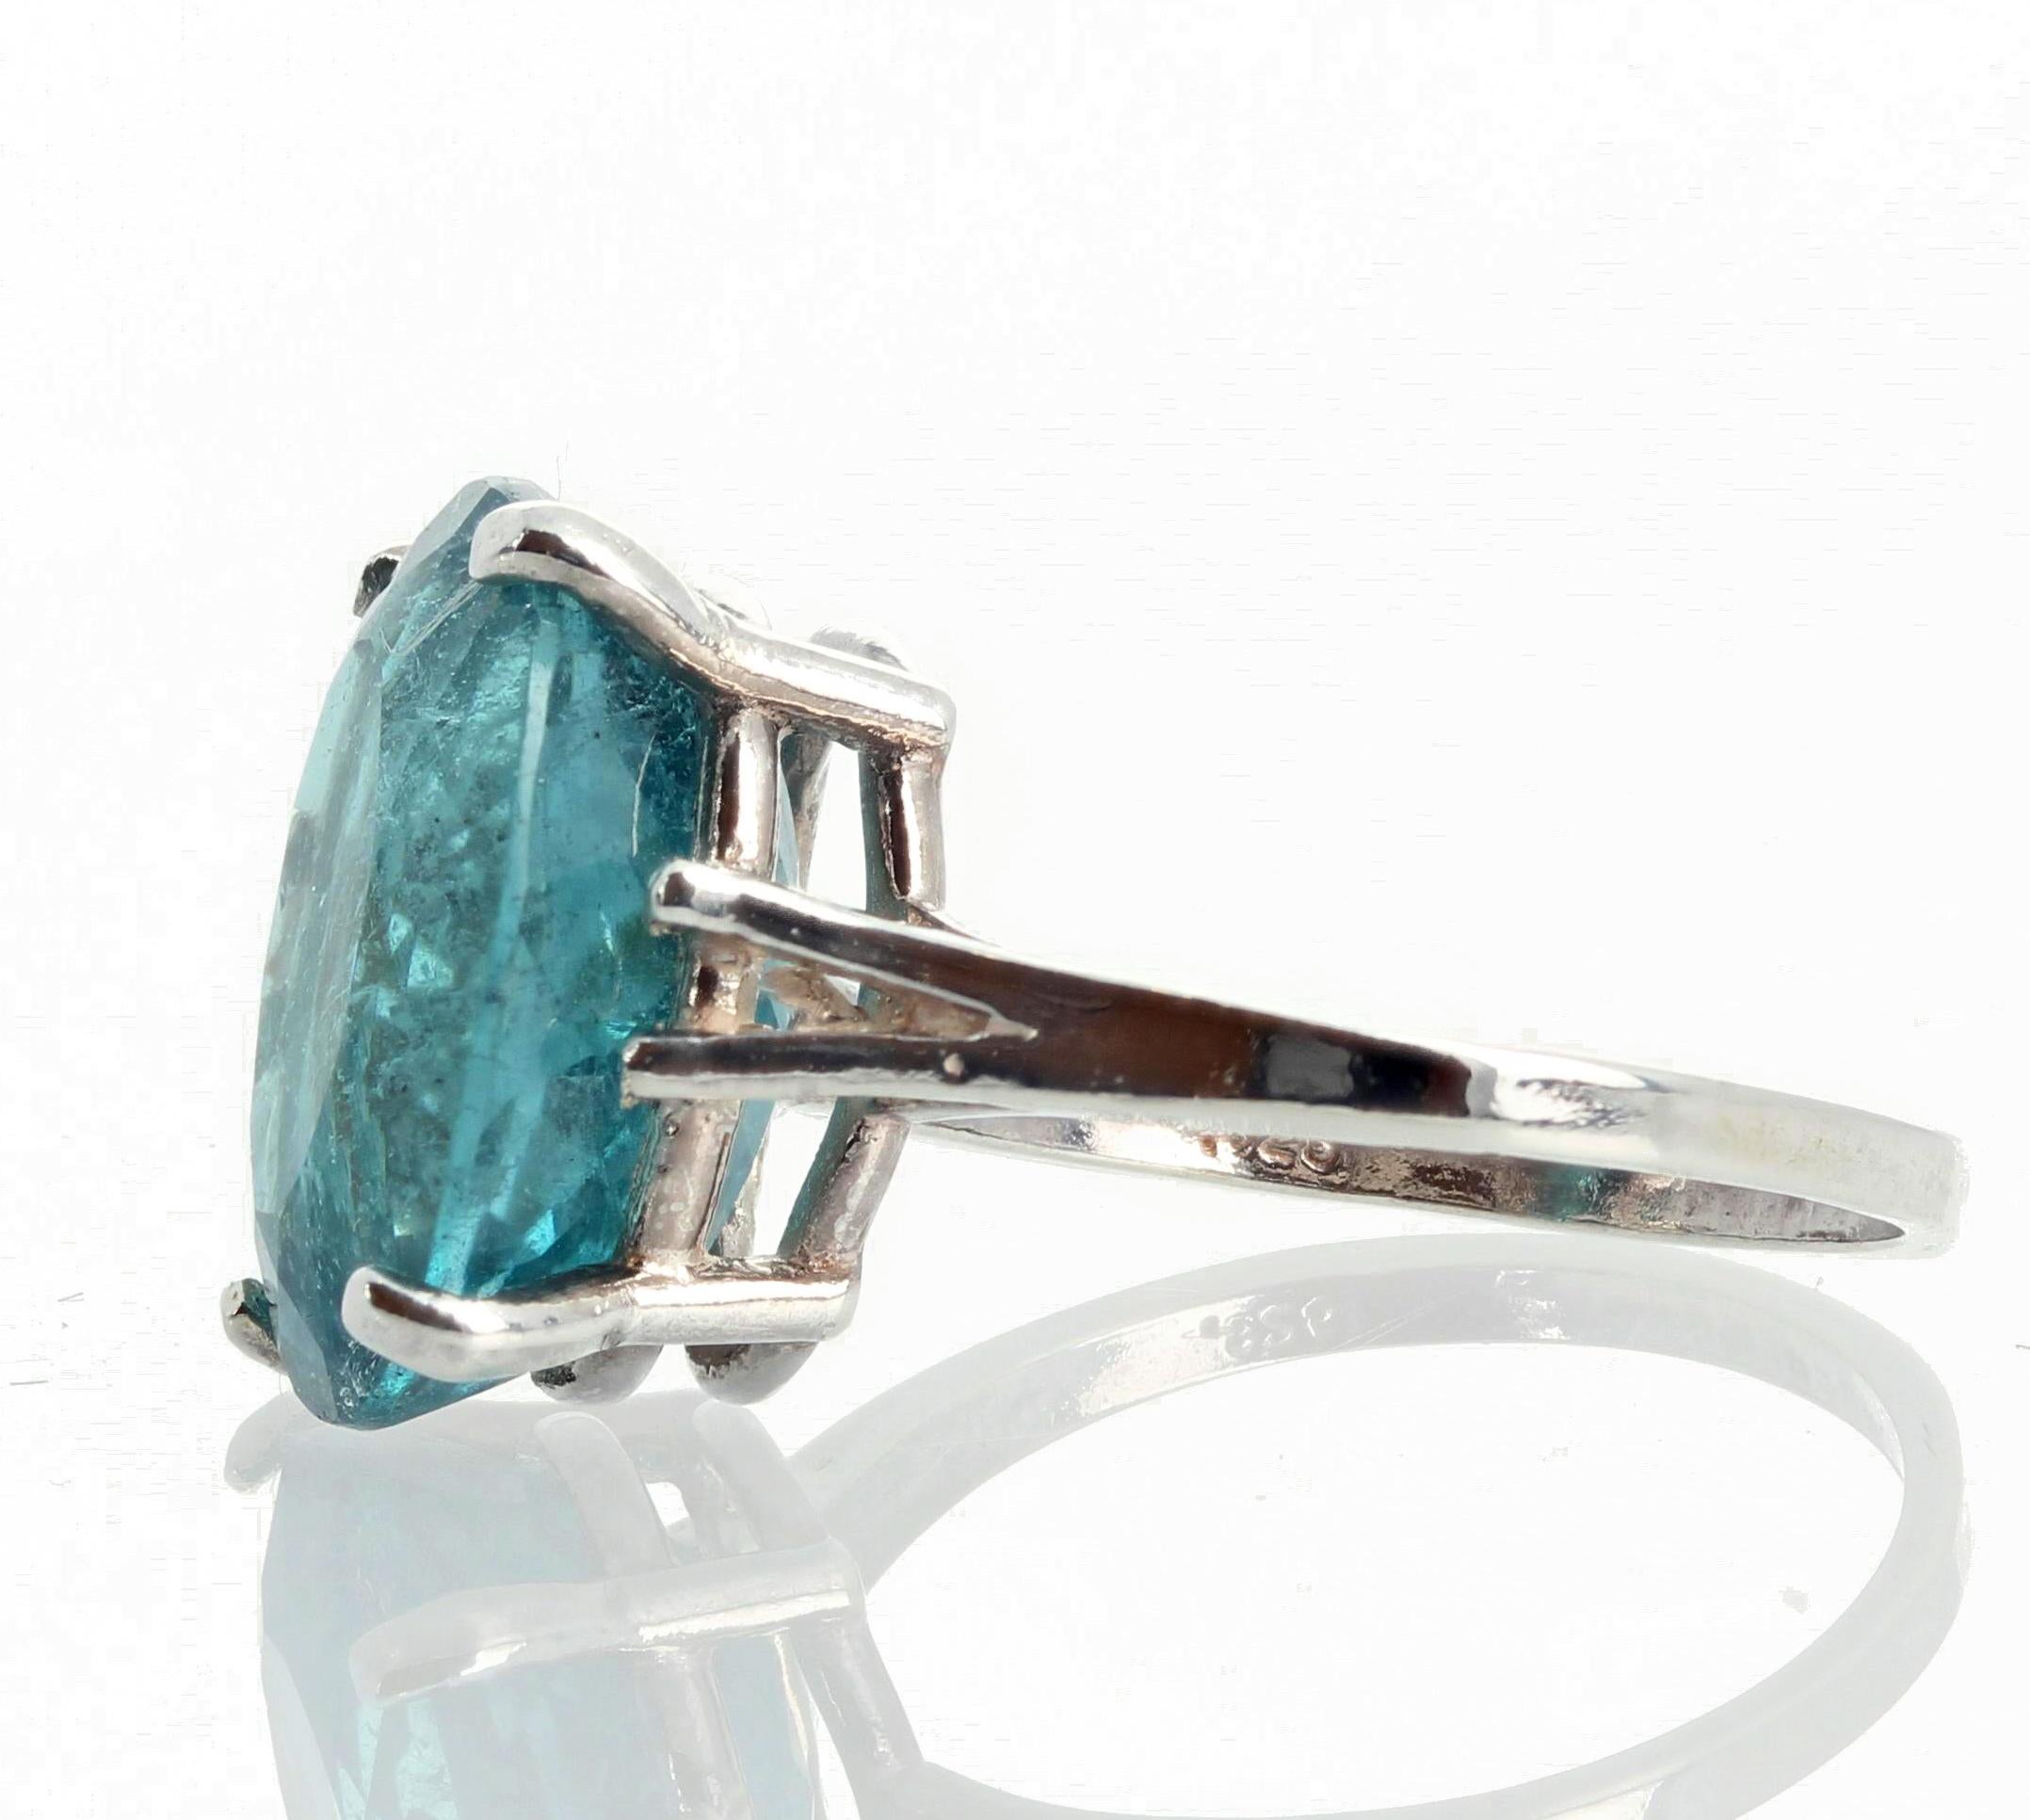 Gemjunky Rare 7.9 Cts Blue Indicolite Tourmaline Sterling Silver Cocktail Ring 1